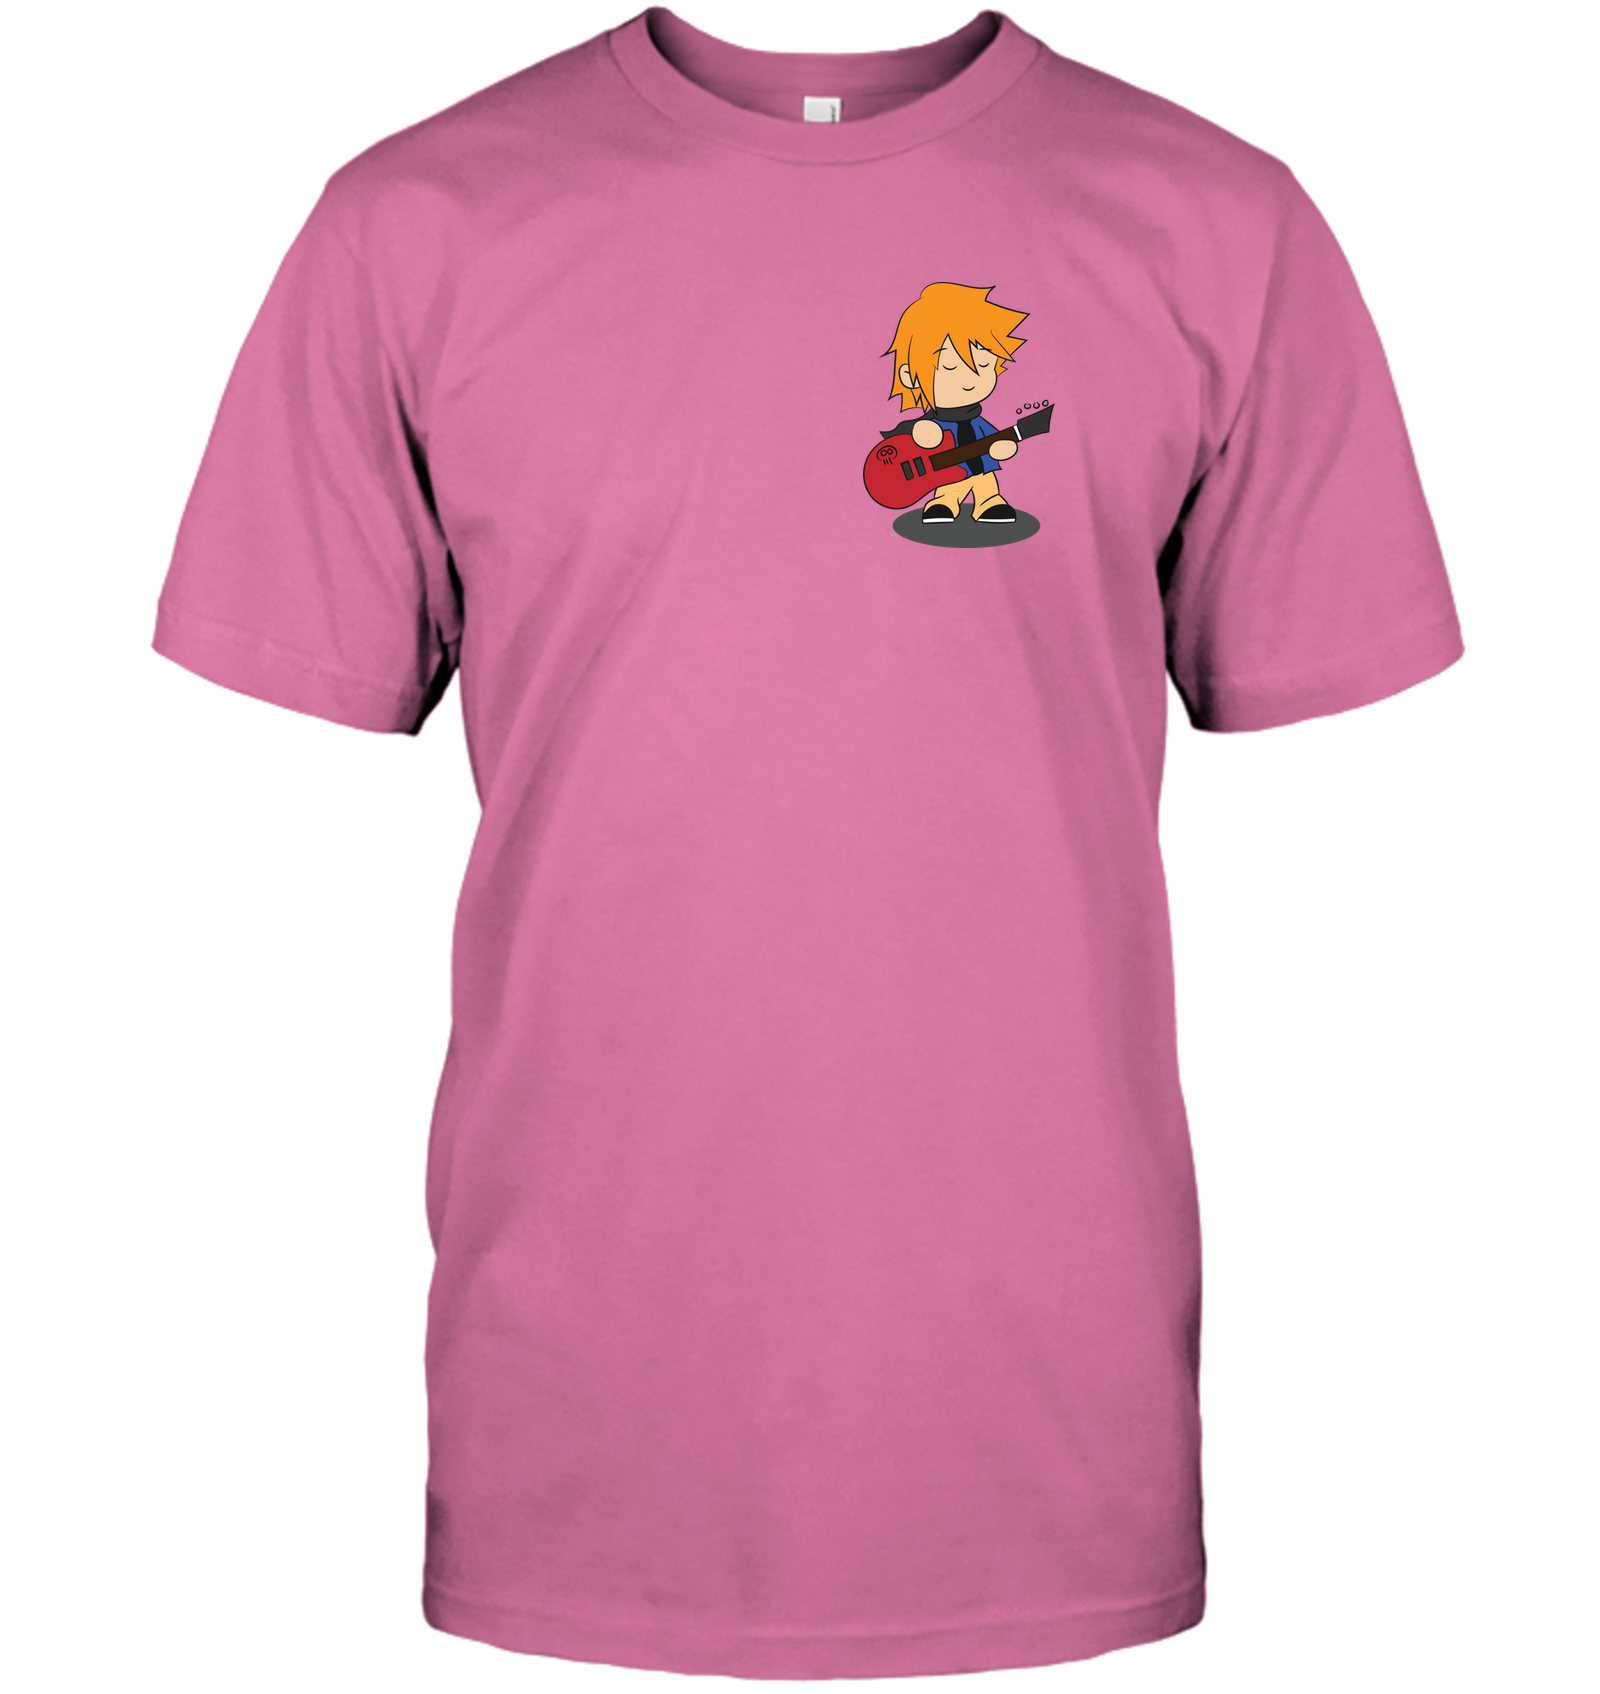 Boy with Guitar (Pocket Size) - Hanes Adult Tagless® T-Shirt